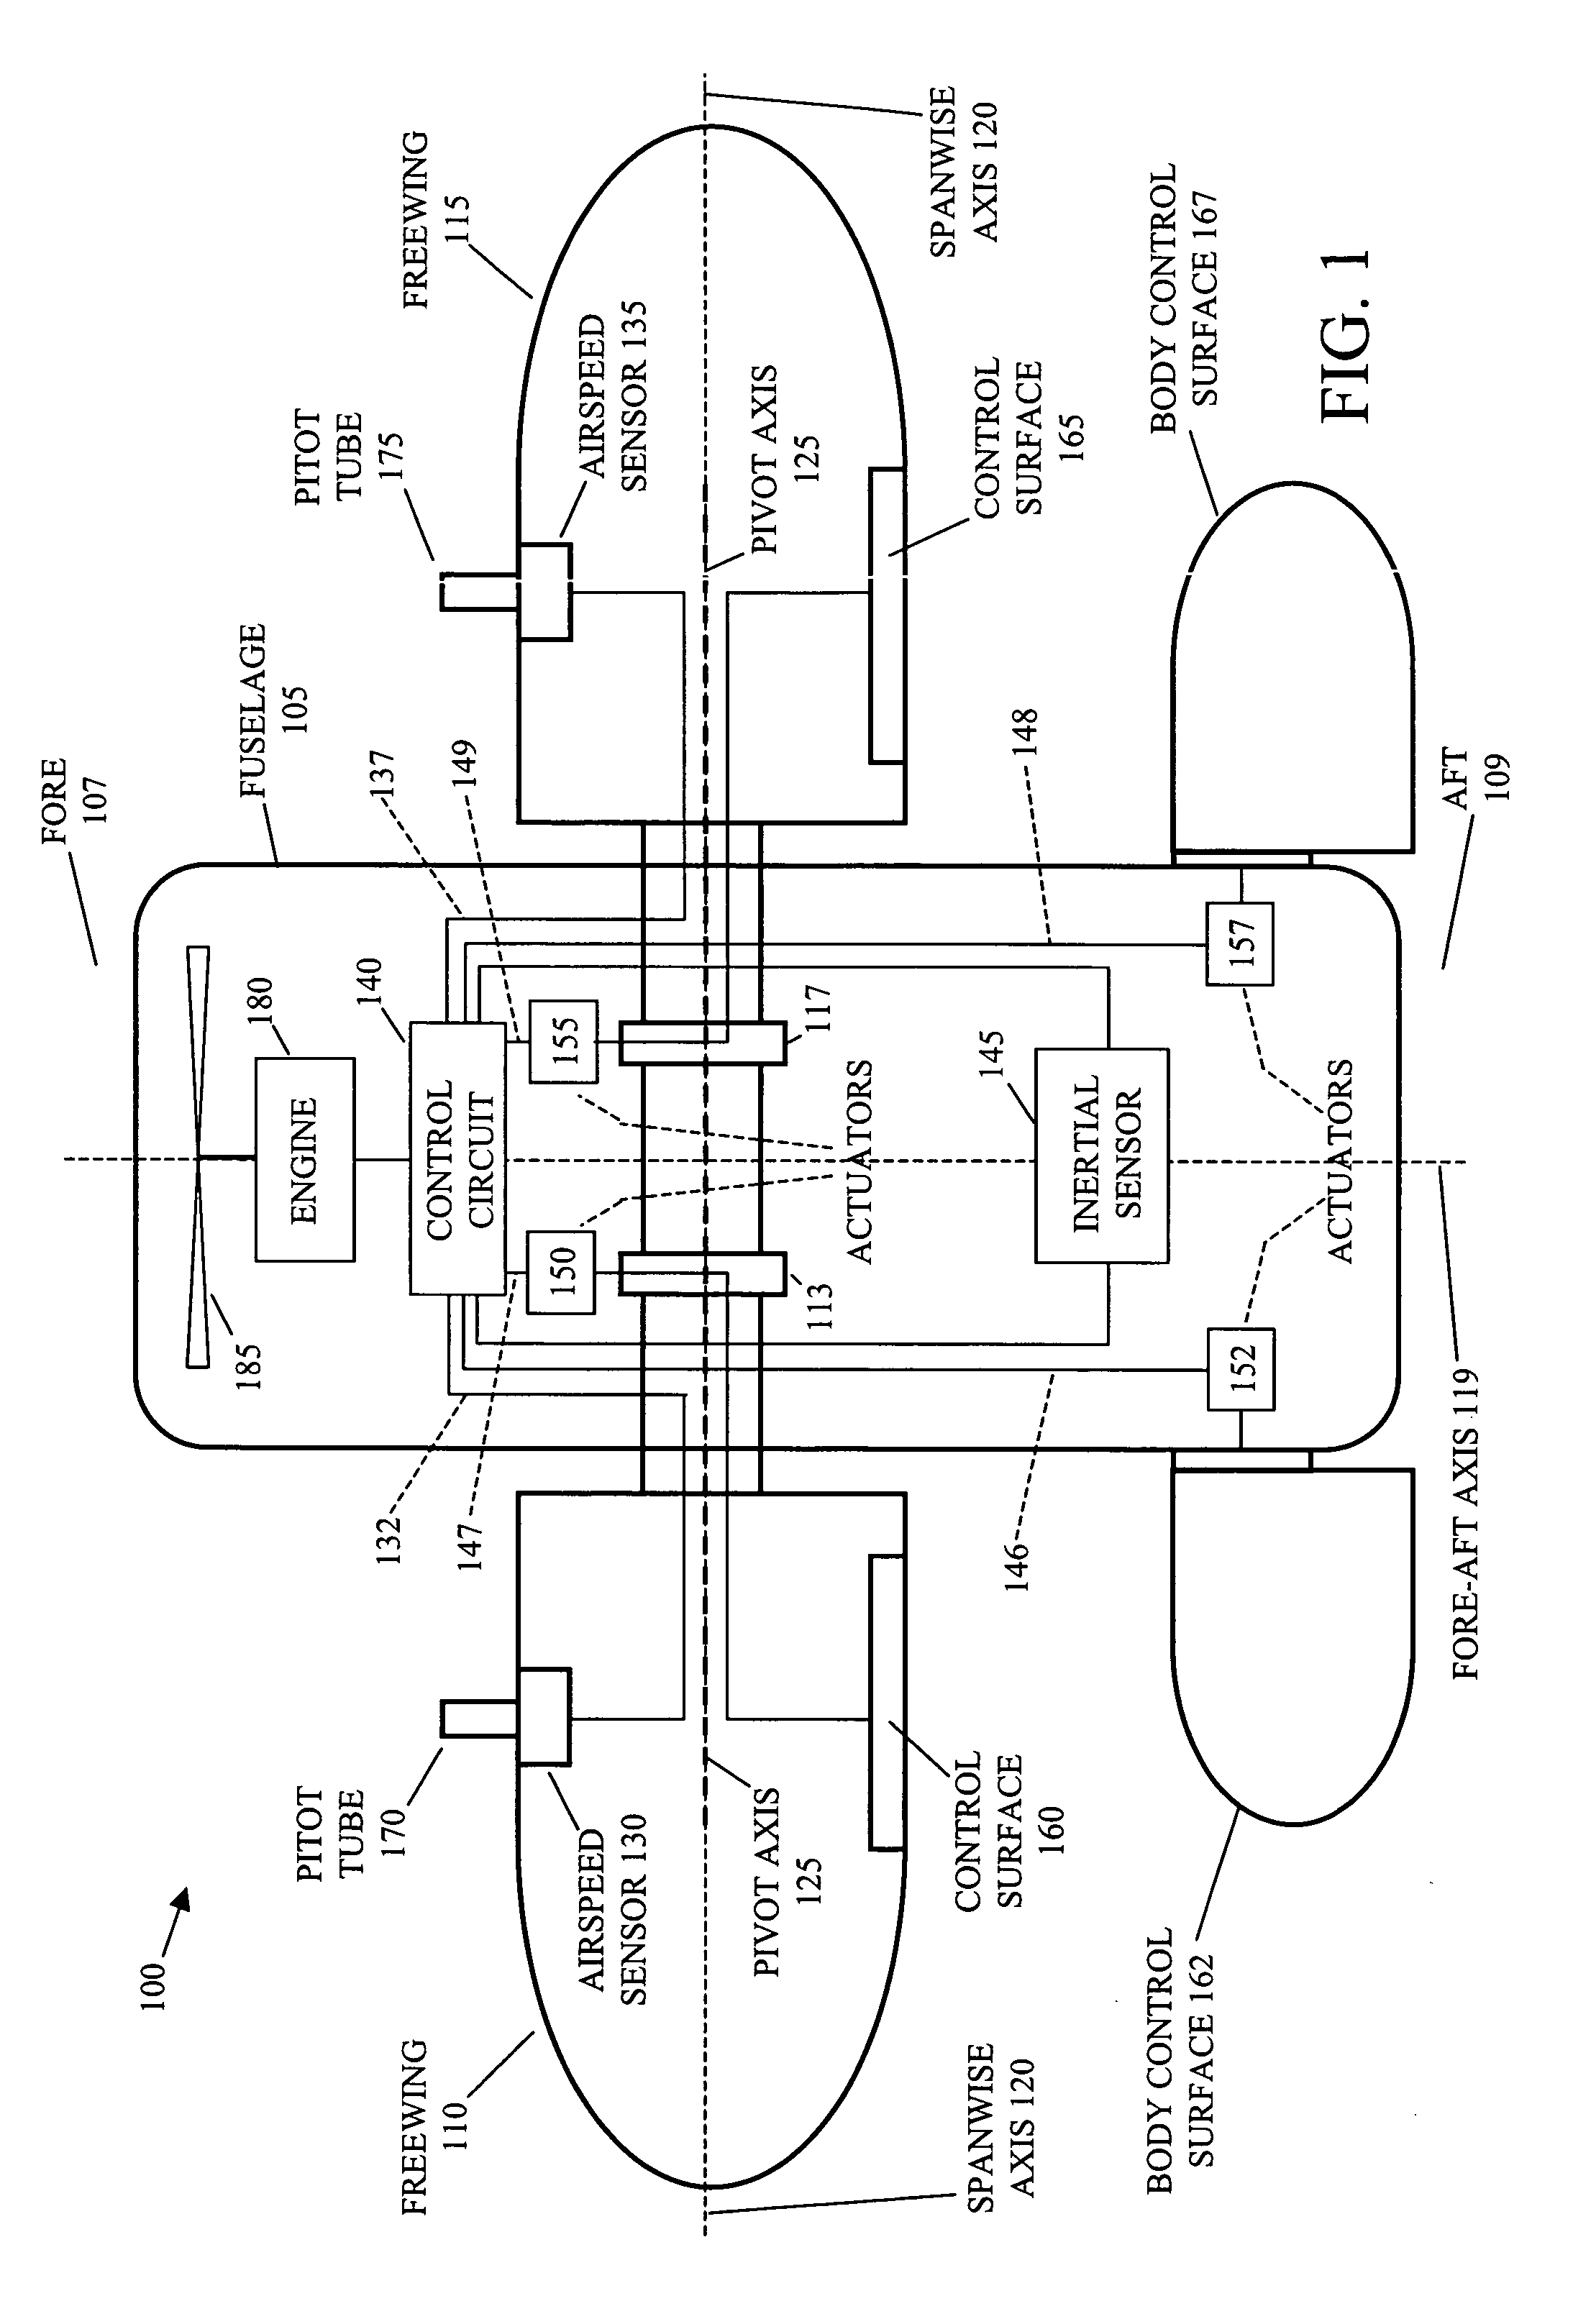 Inbound transition control for a tail-sitting vertical take off and landing aircraft